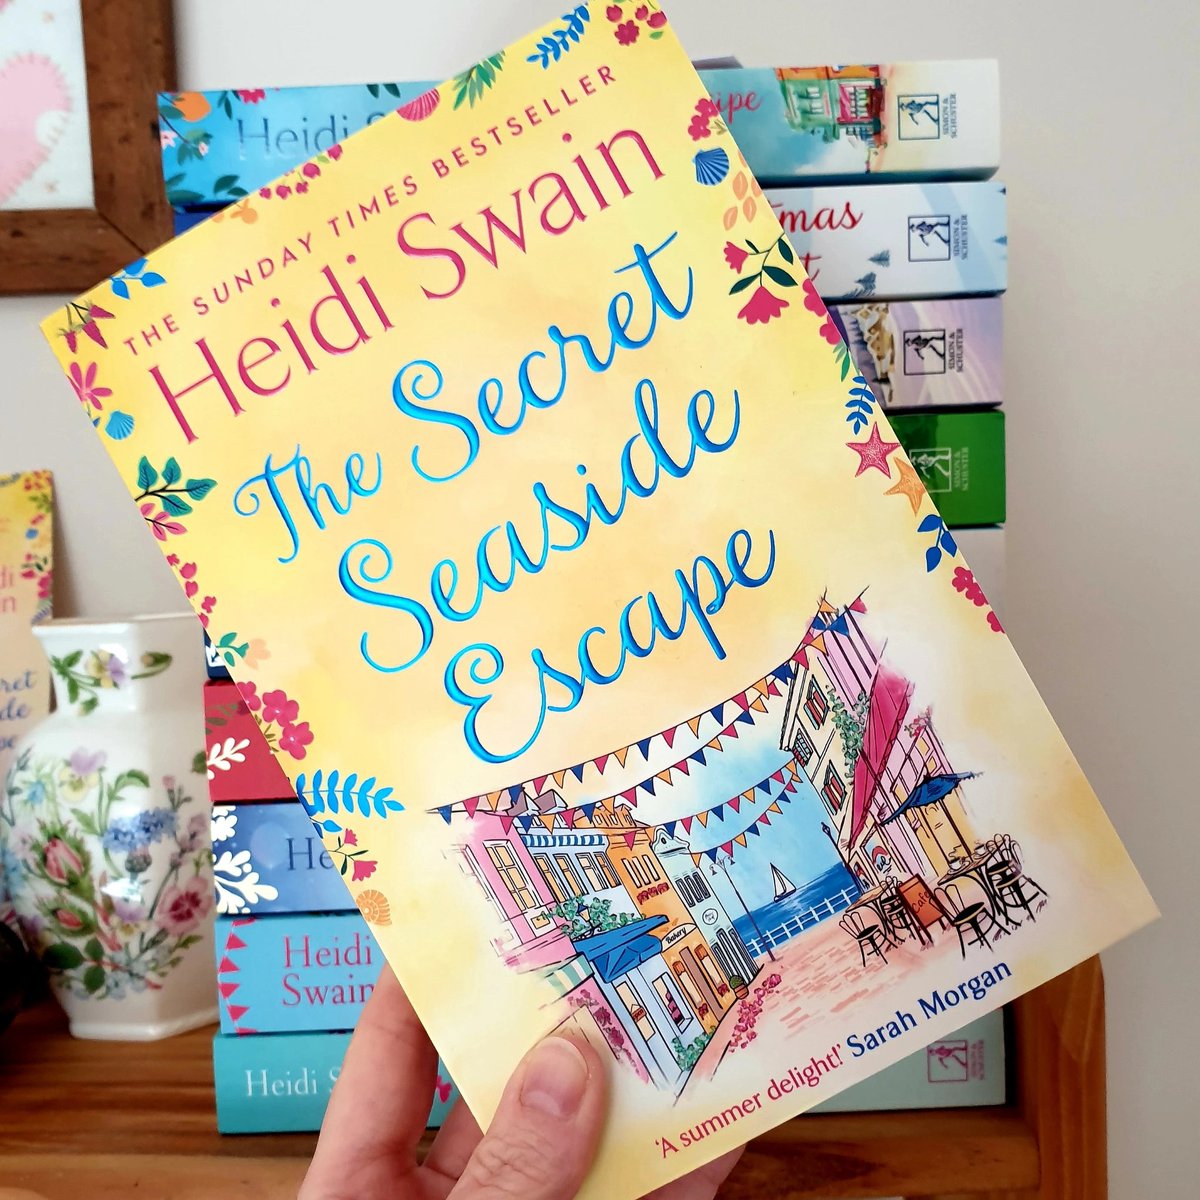 I'm celebrating another #bookbirthday today! It's 4 years since #TheSecretSeasideEscape was published and we were all getting used to #lockdownlife! Thank goodness we had the #northnorfolk #seasidevillage of #Wynmouth to escape to...

🐚🌞🐚🌞🐚🌞🐚

amzn.eu/d/g9HfY8n